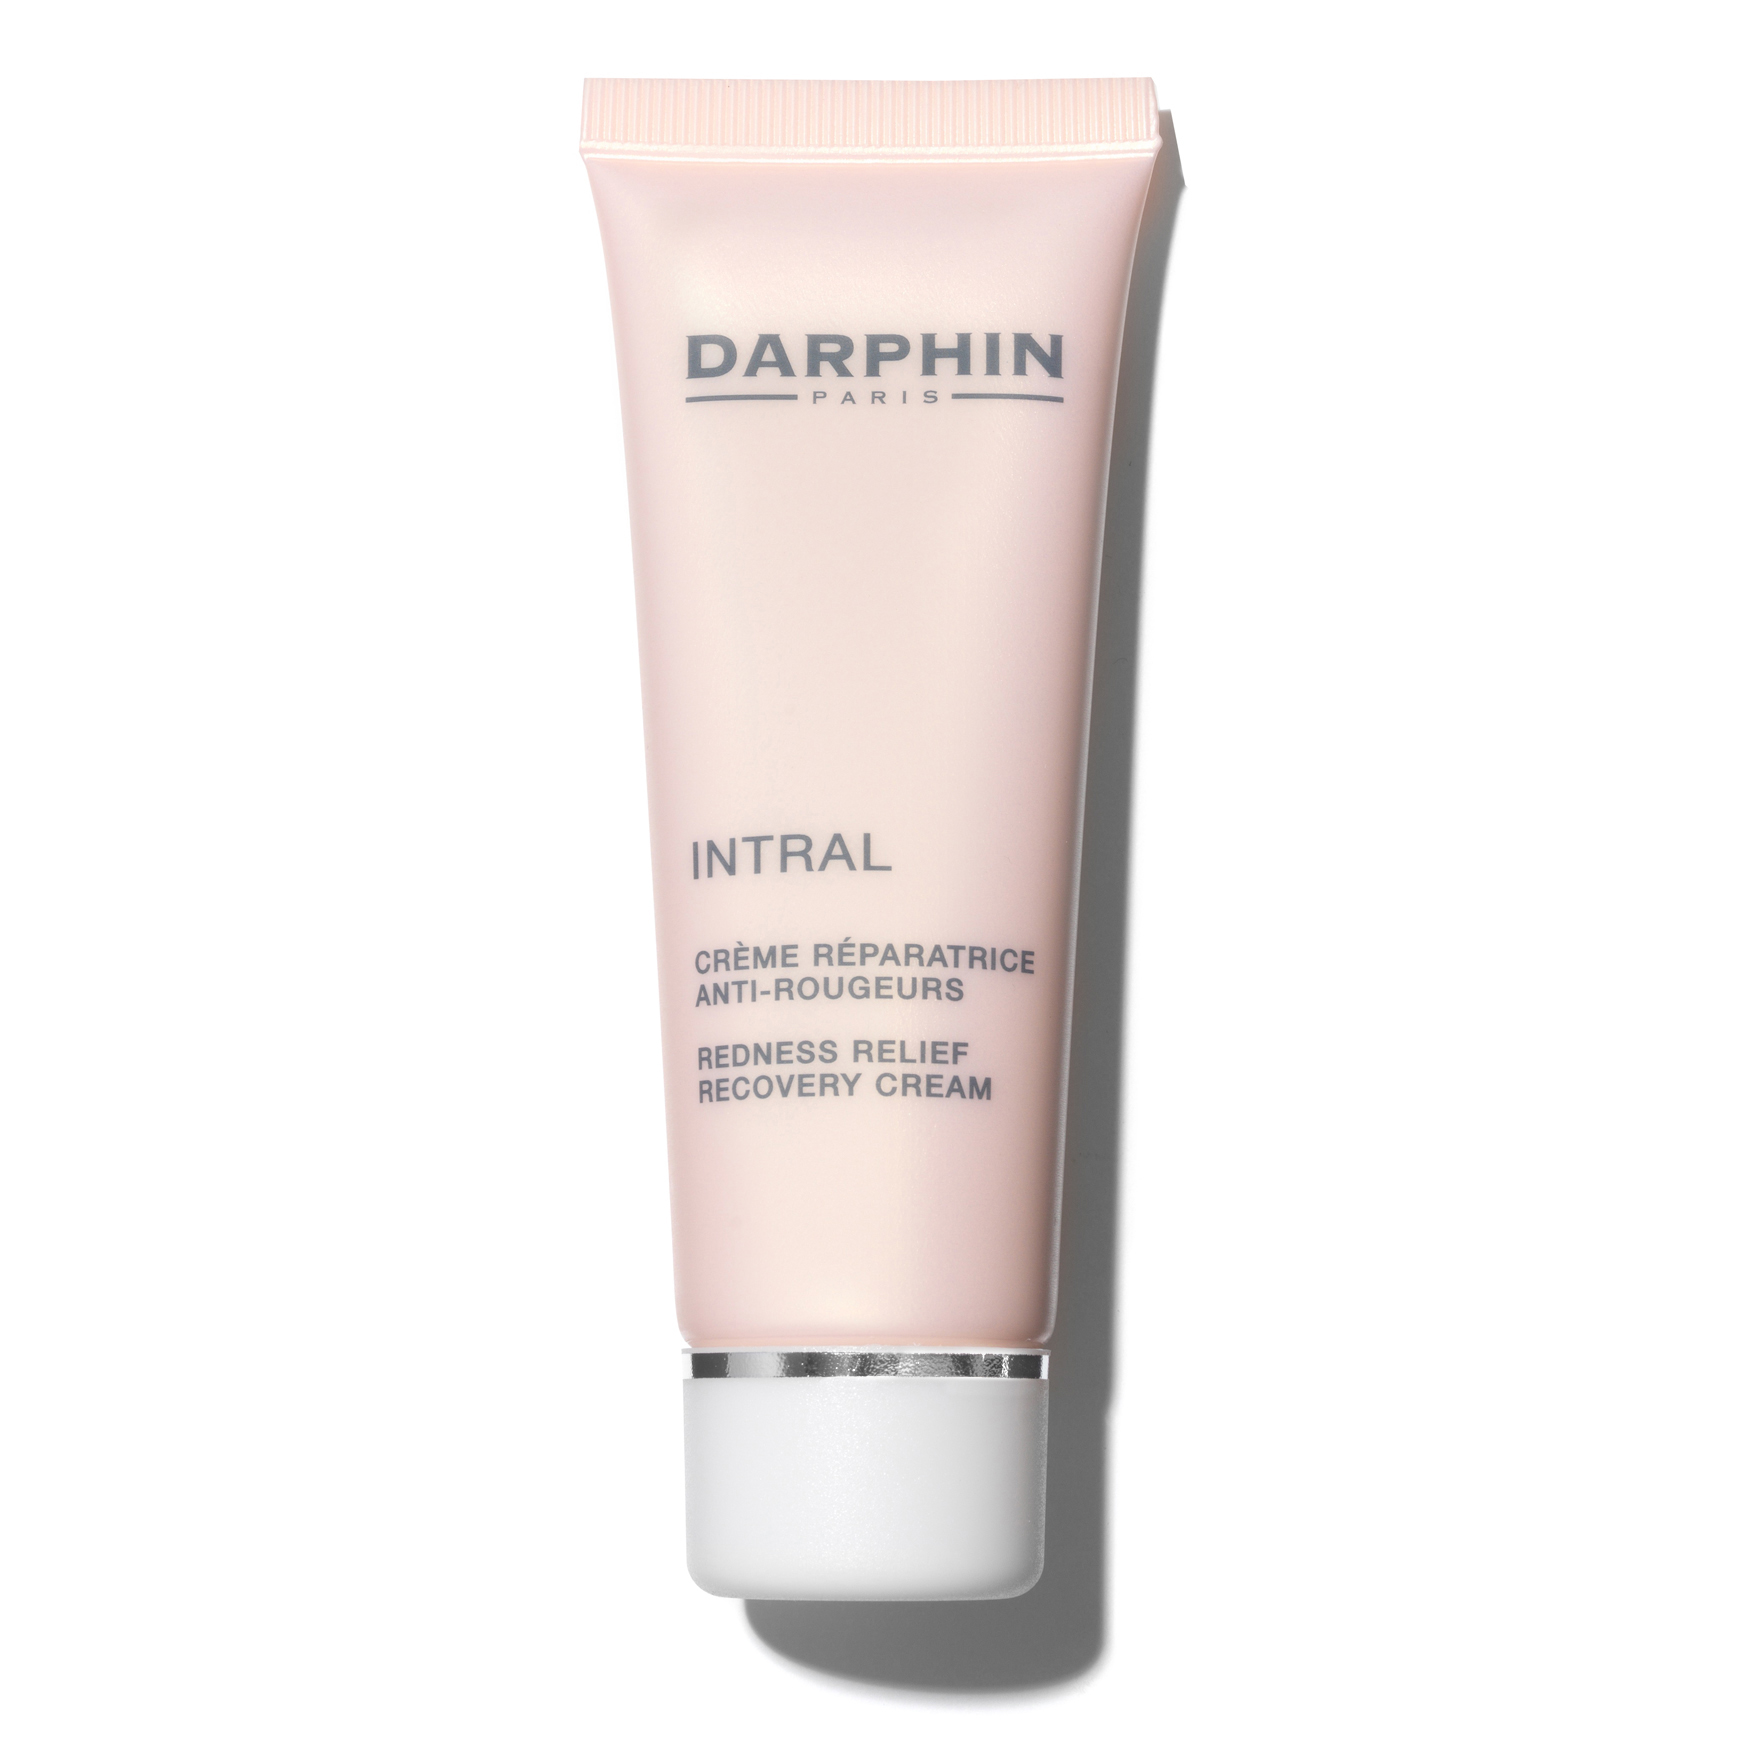 Intral Redness Darphin | Space NK